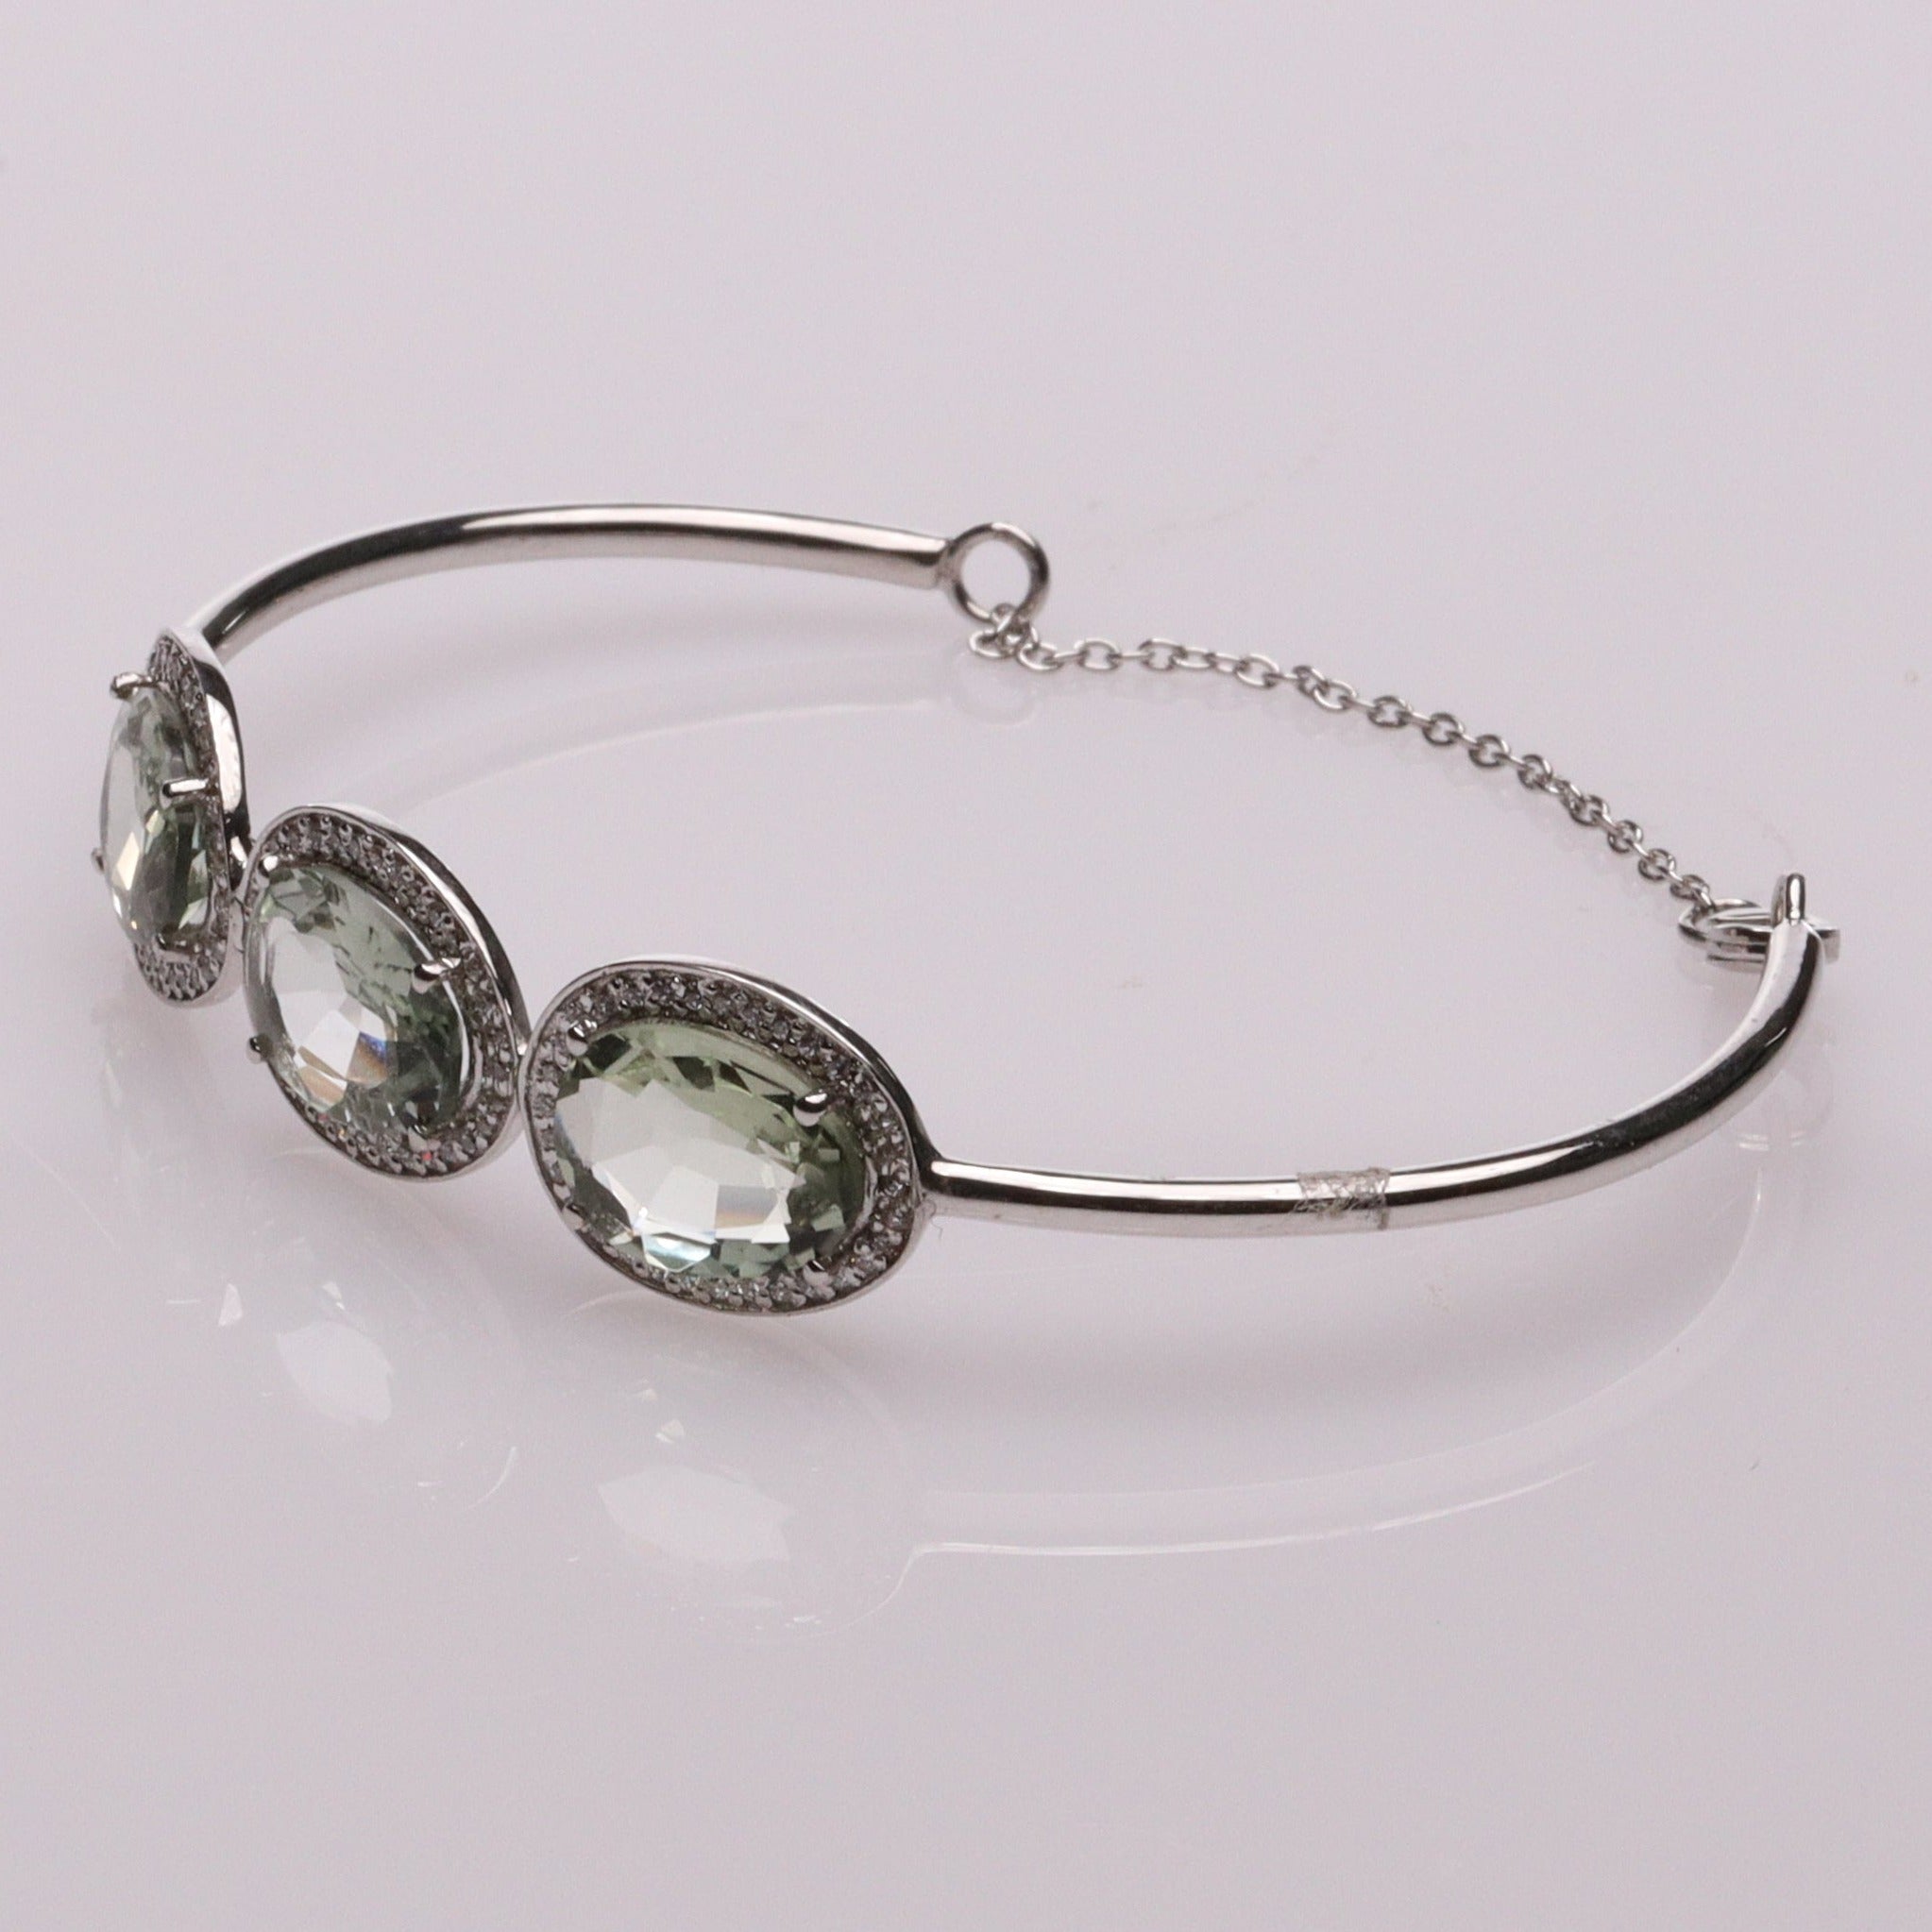 Blisse Allure Sea Green Amethyst Bangle Bracelet with white cubic zirconia